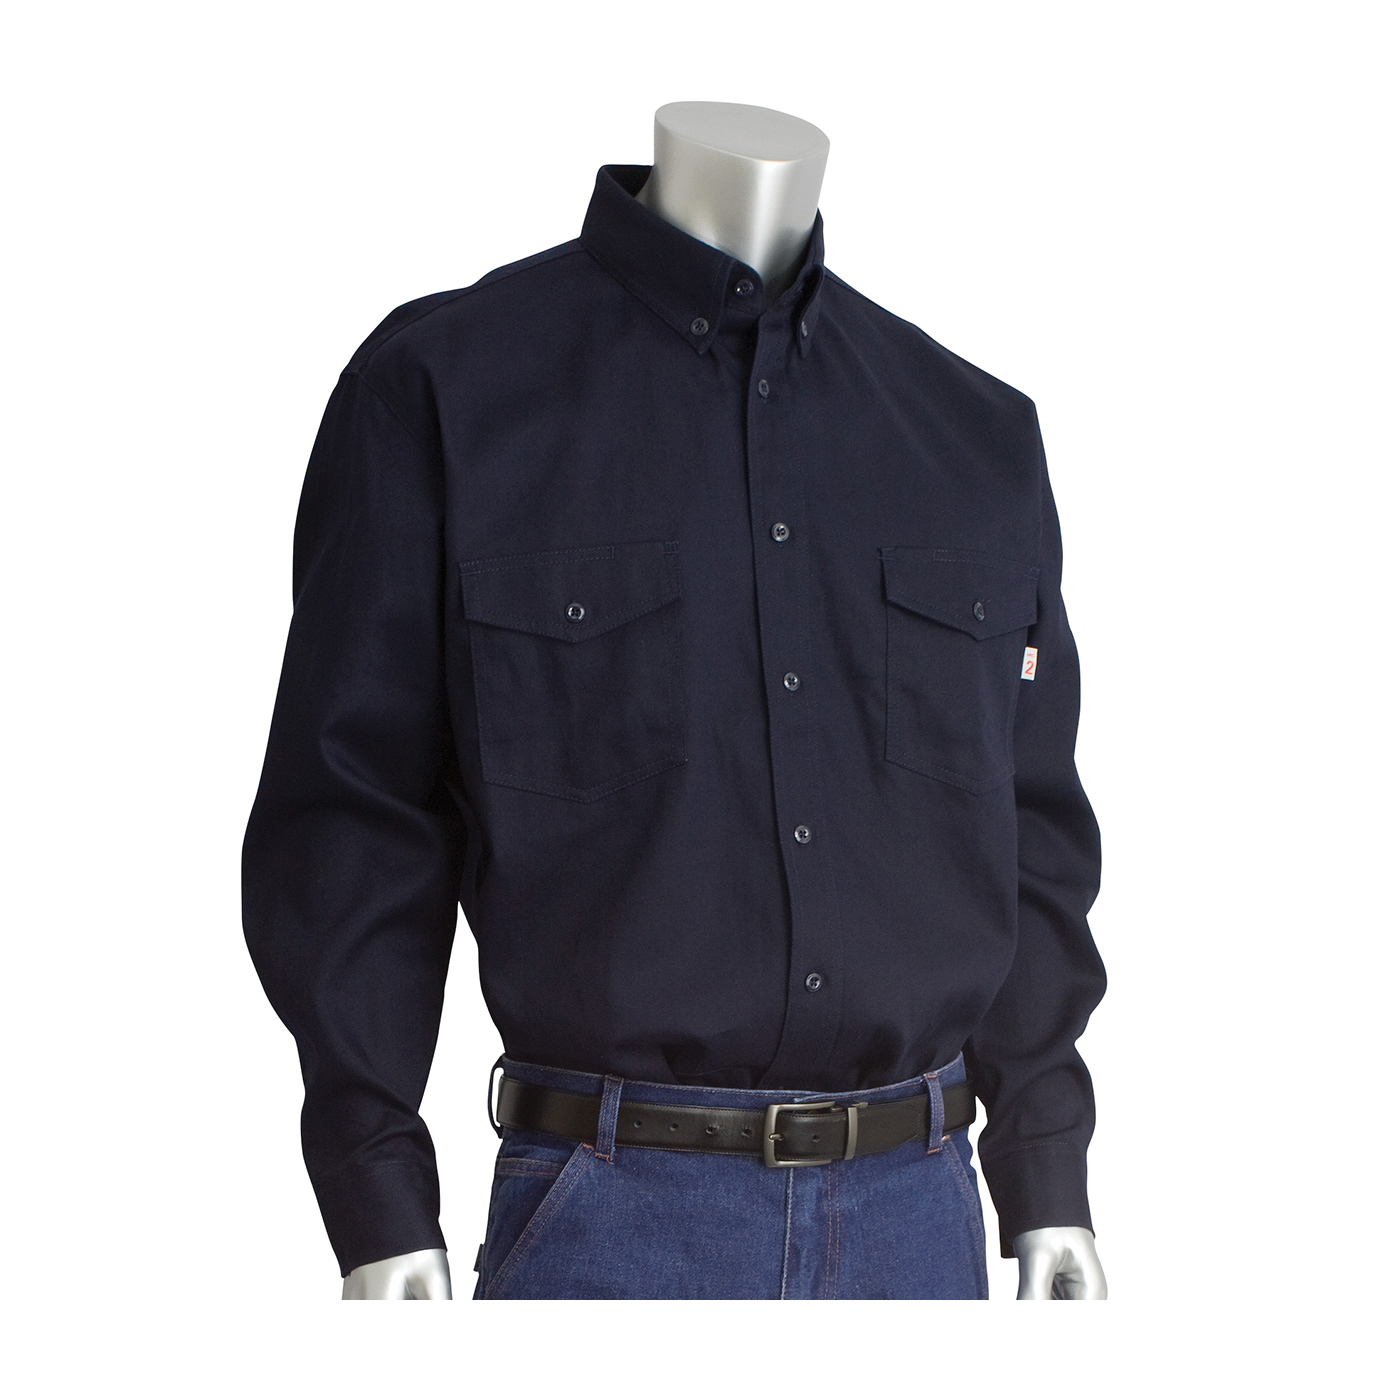 PIP® 385-FRWS-NV/S 385-FRWS Arc and Flame Resistant Long Sleeve Workshirt, S, Navy Blue, 90% Cotton/10% Nylon, 30-1/2 in L